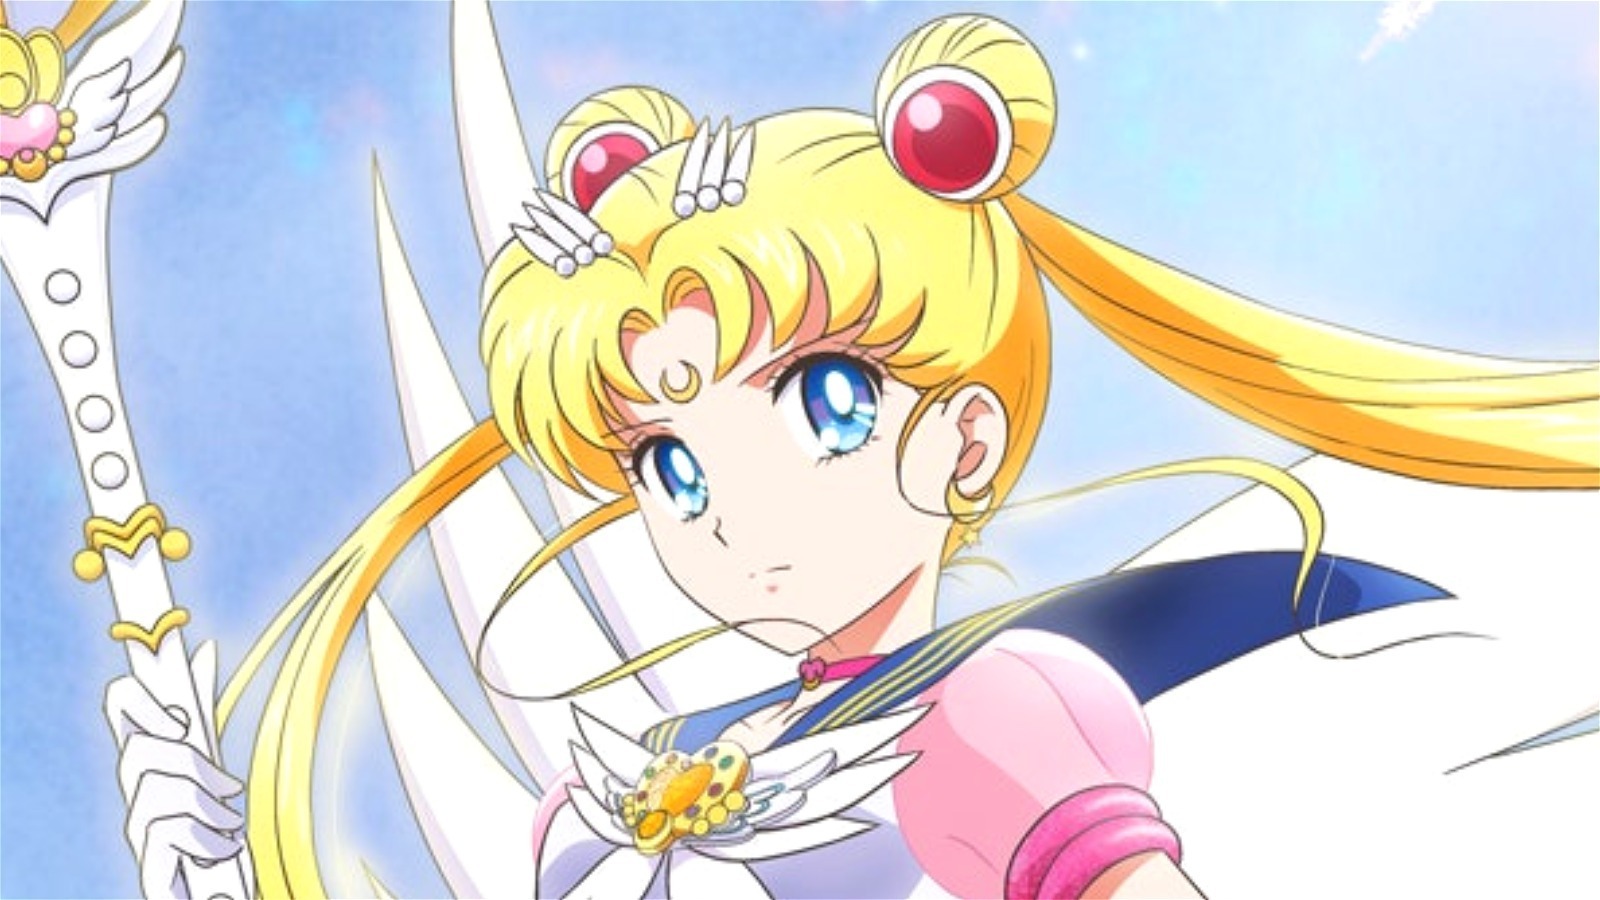 Sailor Moon Crystal Available to Stream Through Netflix in Early July